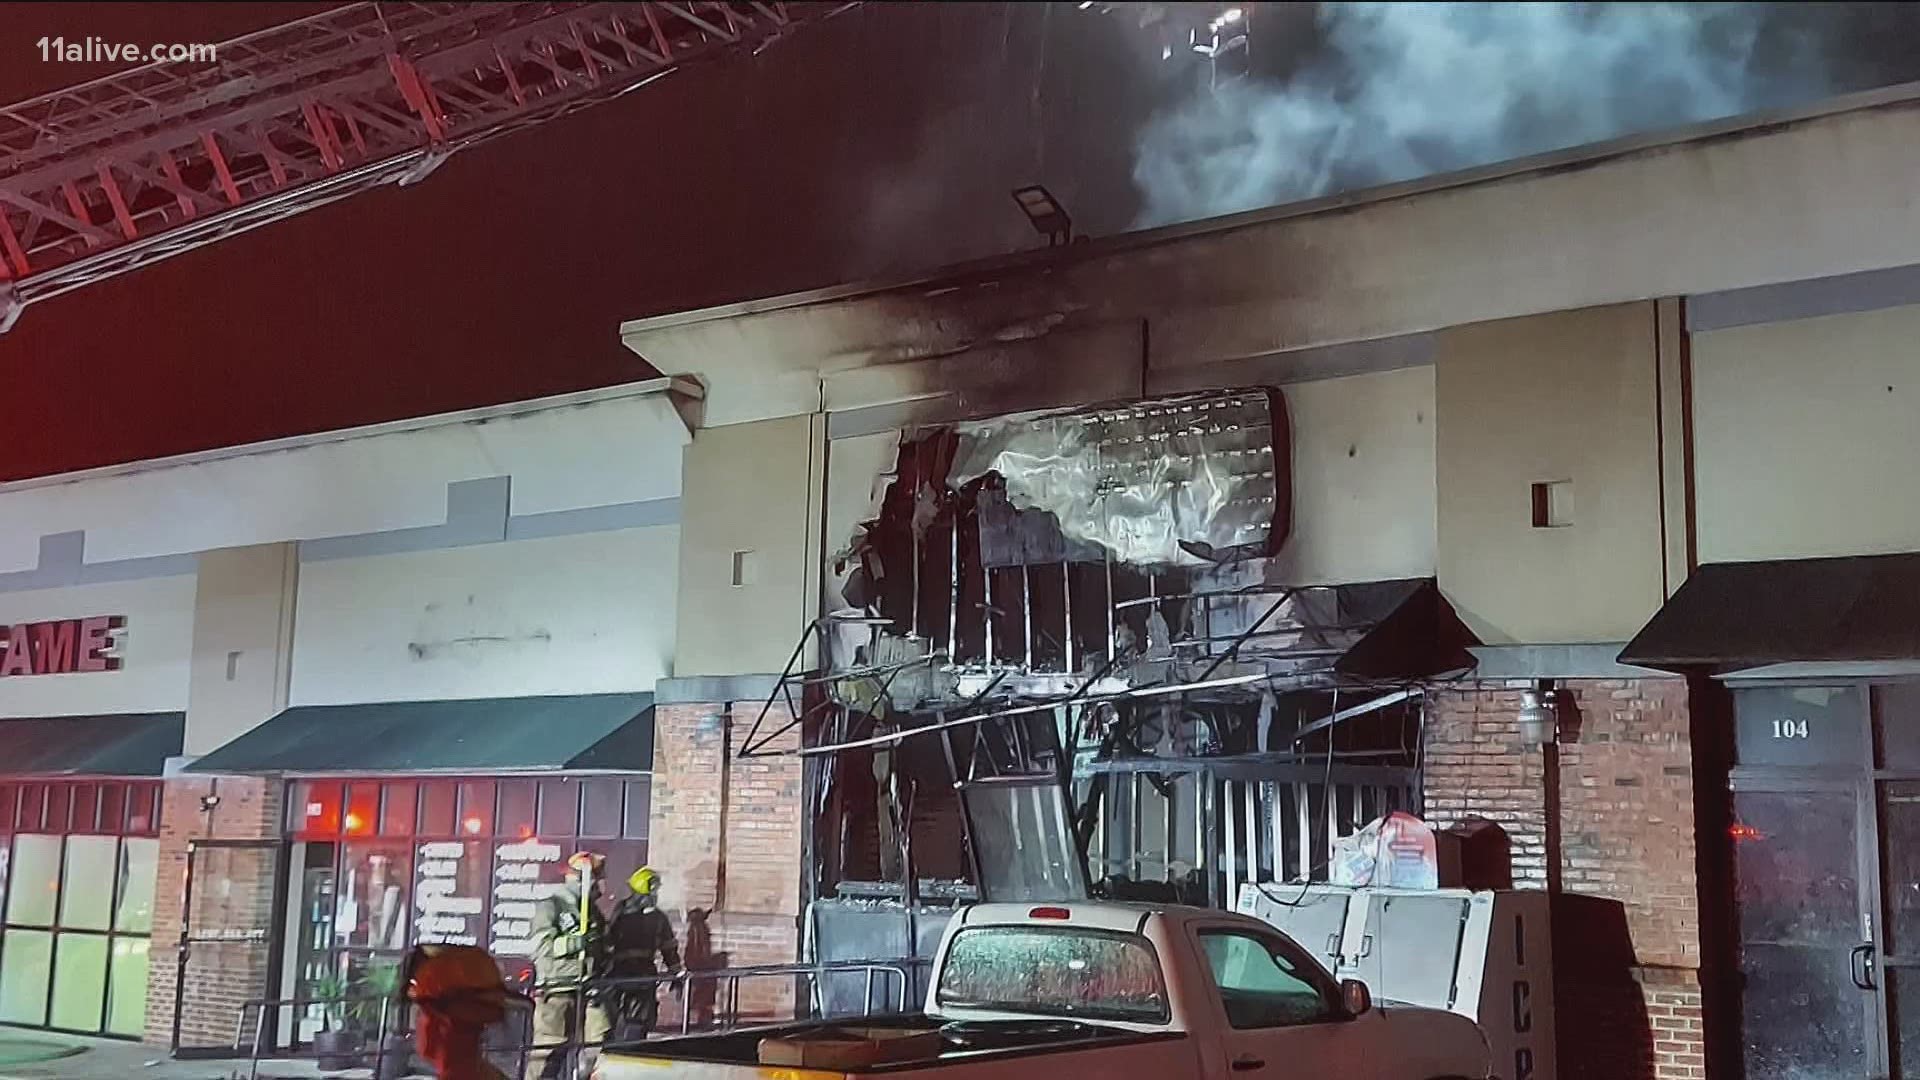 No one was inside of the stores when the fire broke out.